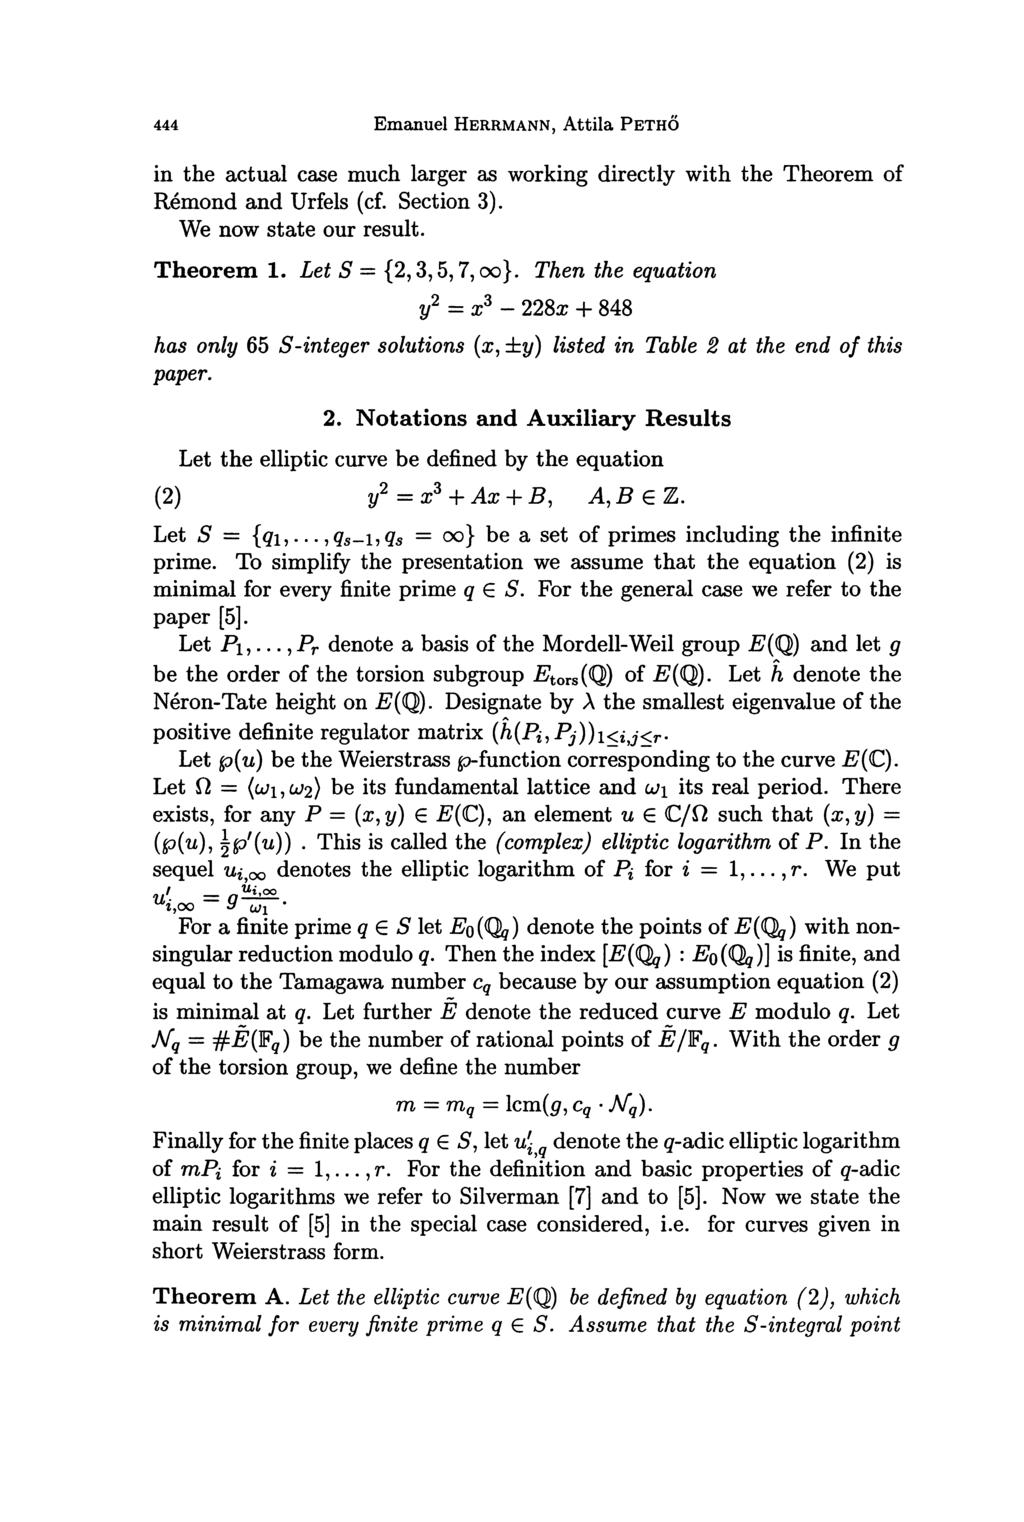 444 in the actual case much larger as working directly with the Theorem of Remond and Urfels (cf. Section 3). We now state our result. Theorem 1. Let S {2, 3, 5,?, oo}.